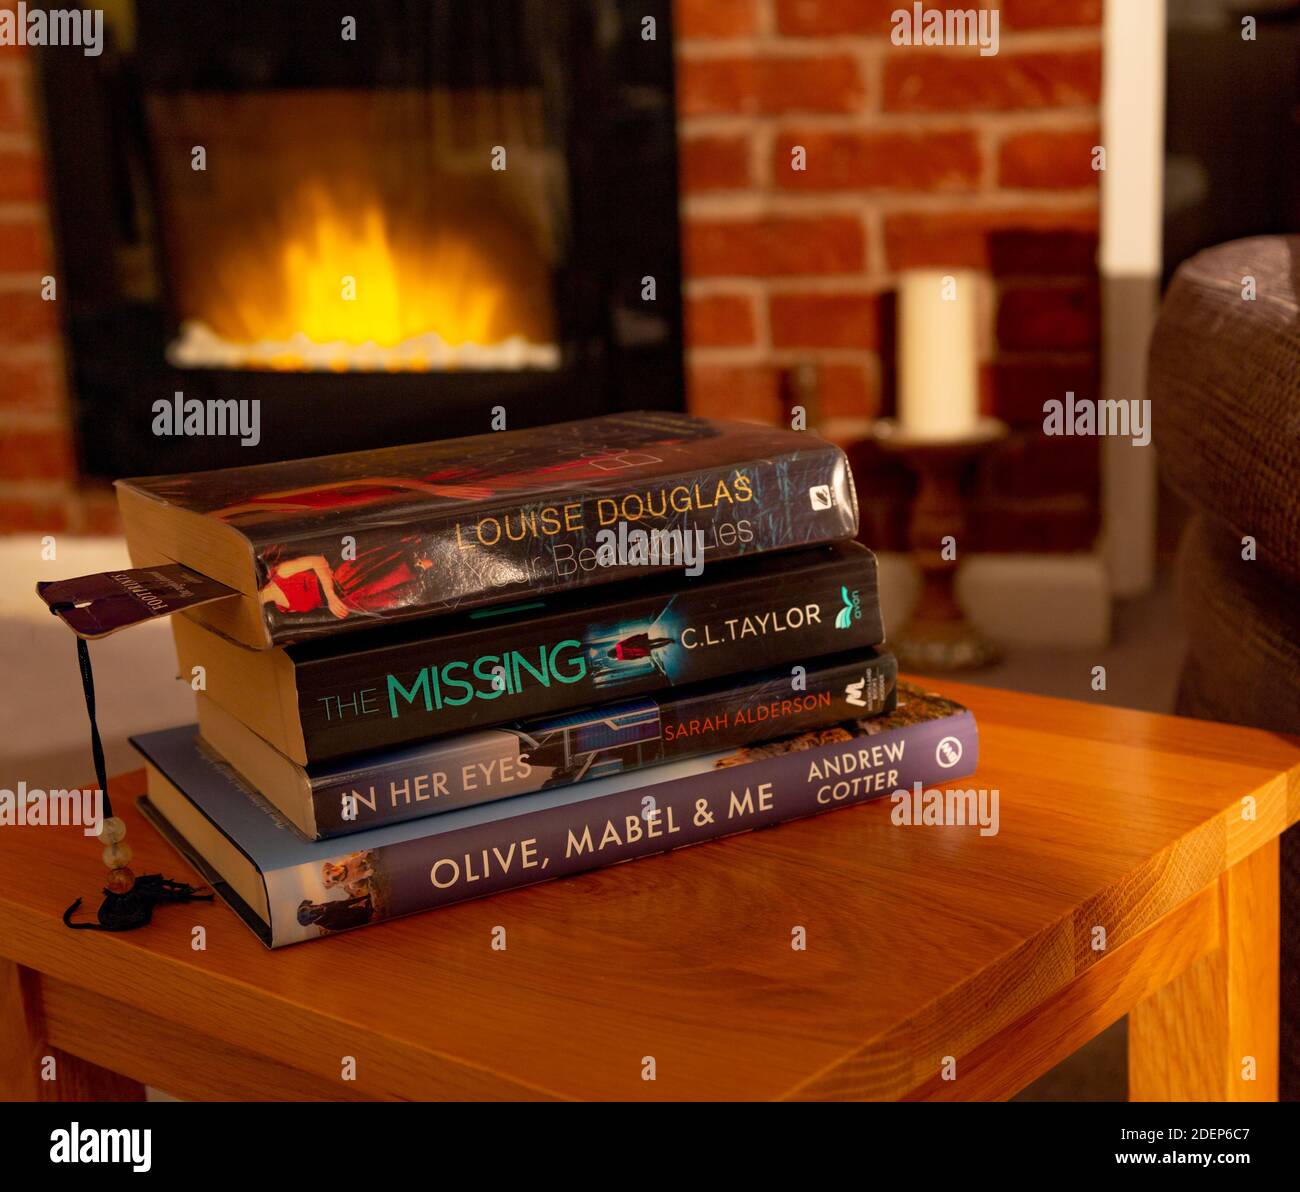 A pile of books on a coffee table in front of a real flame effect electric fire. Stock Photo